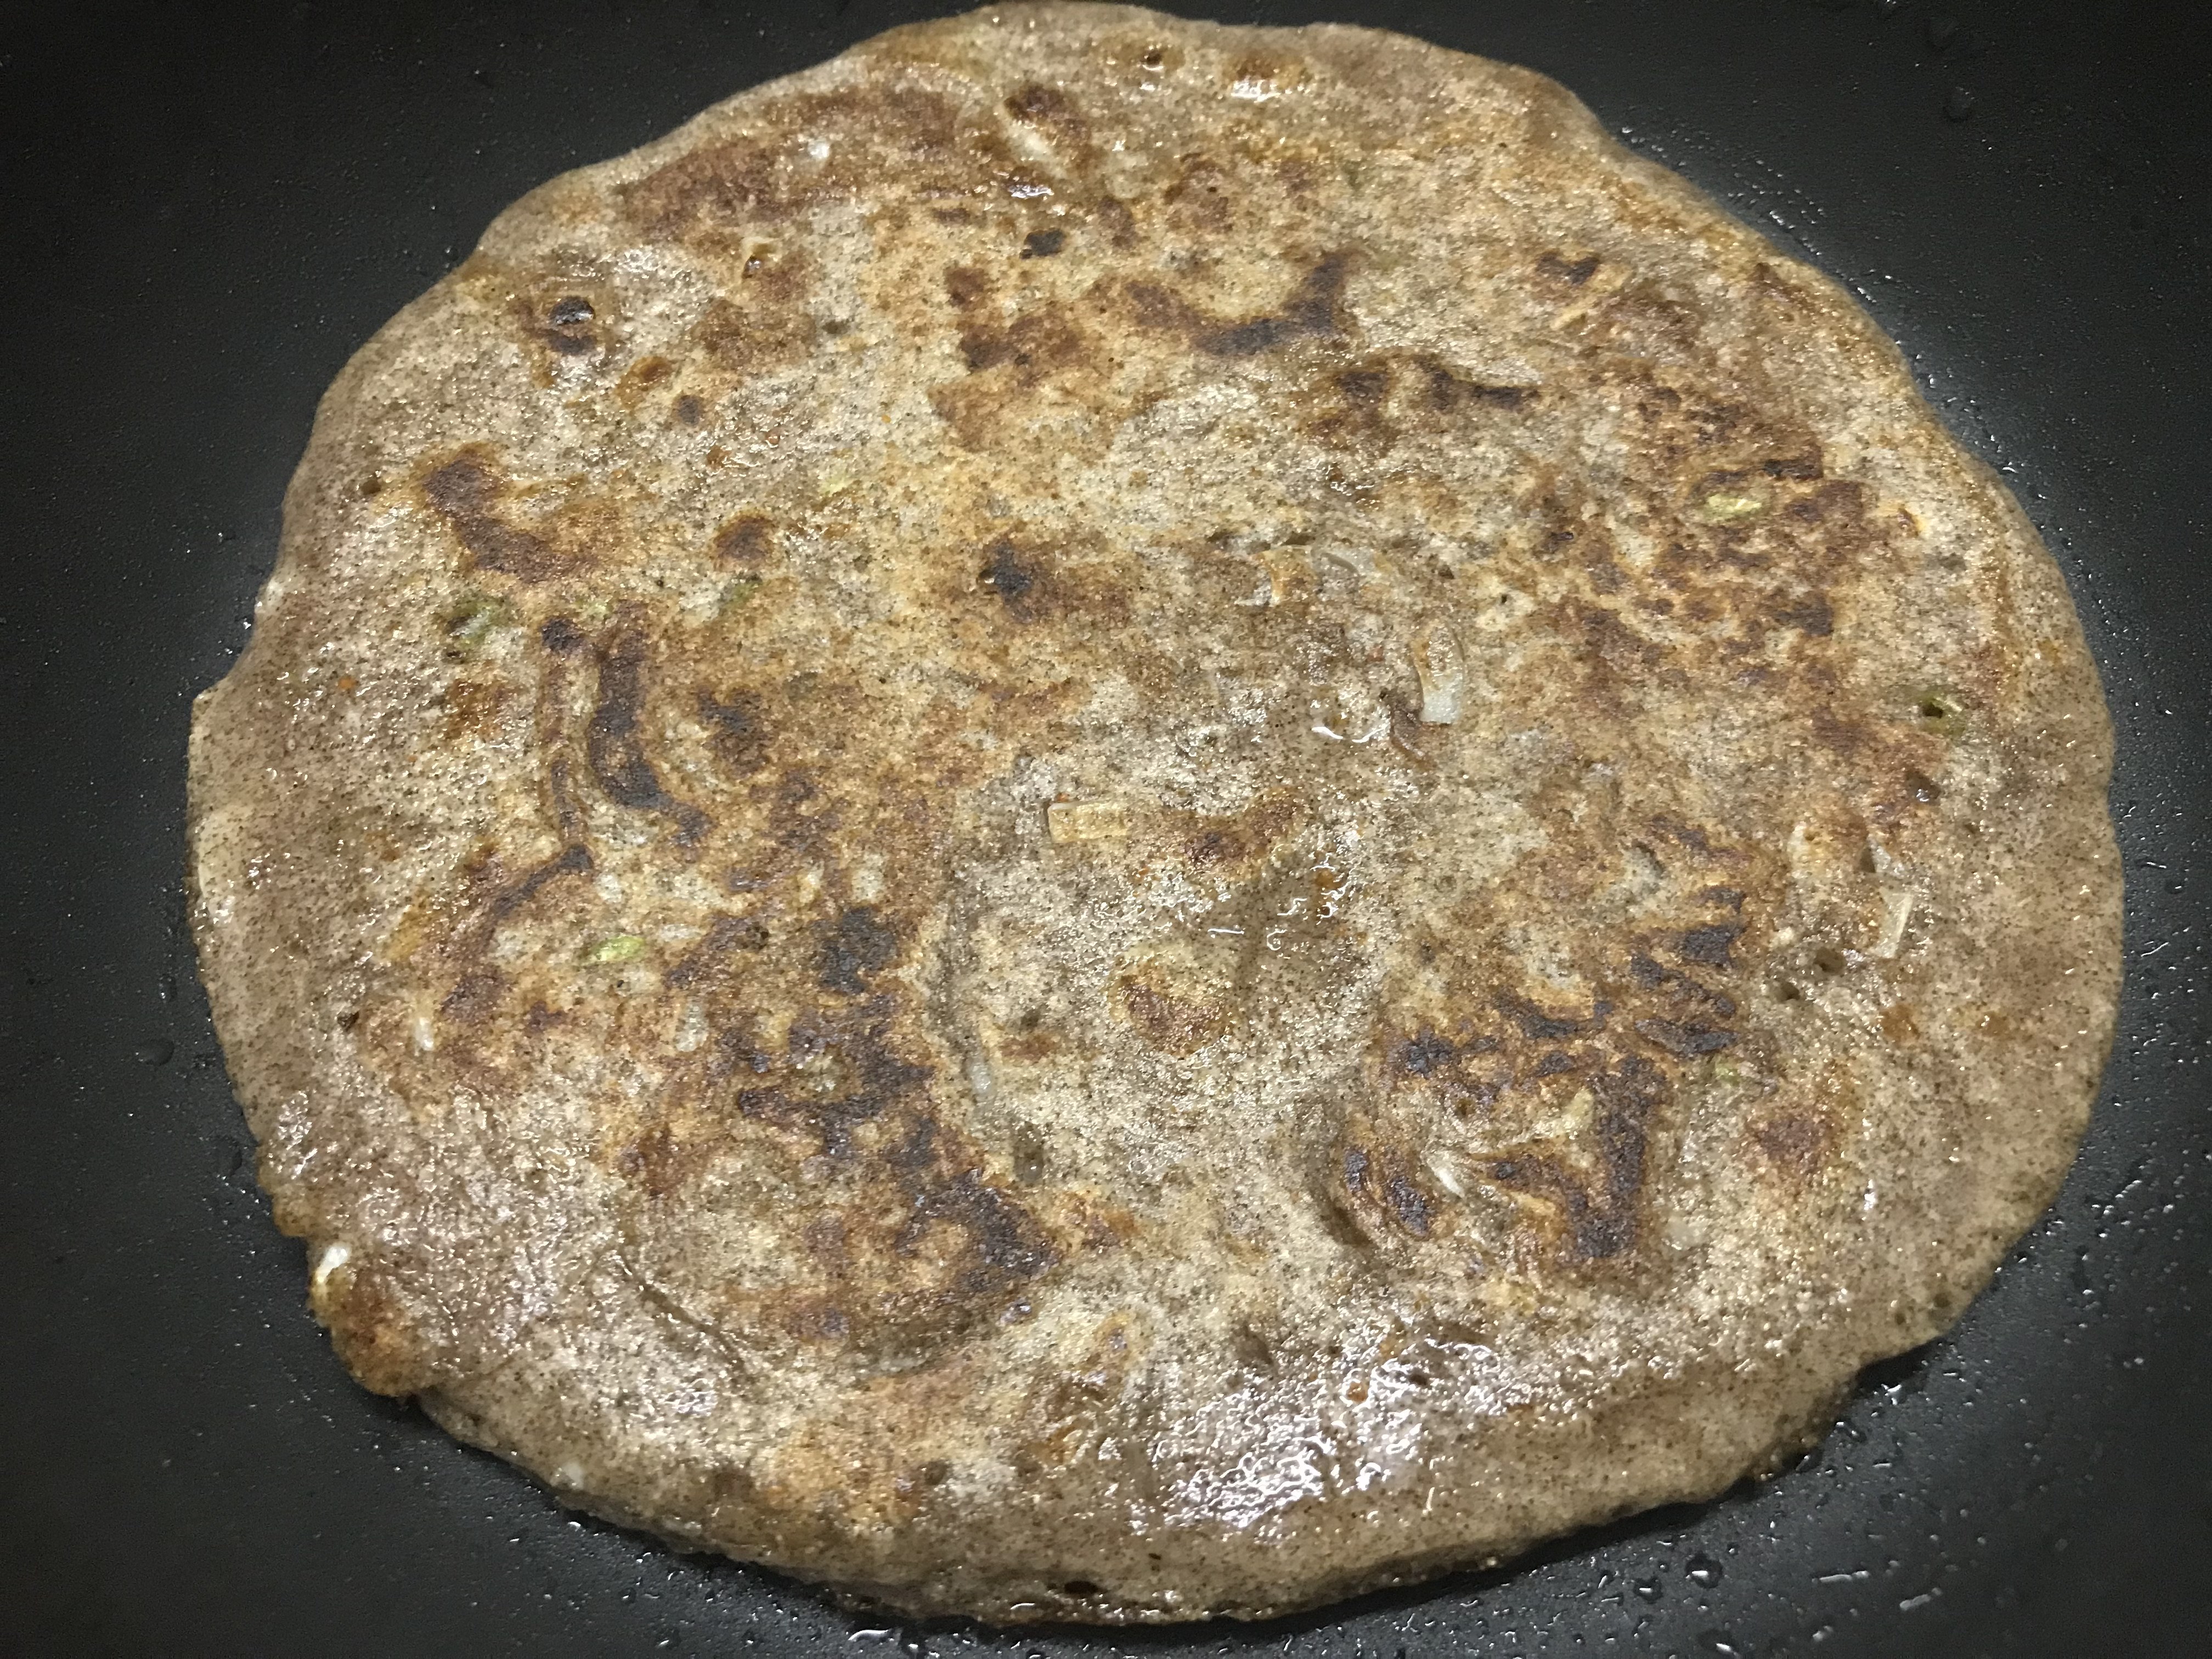 Flipping ragi chilla to other side and cooking it from both sides